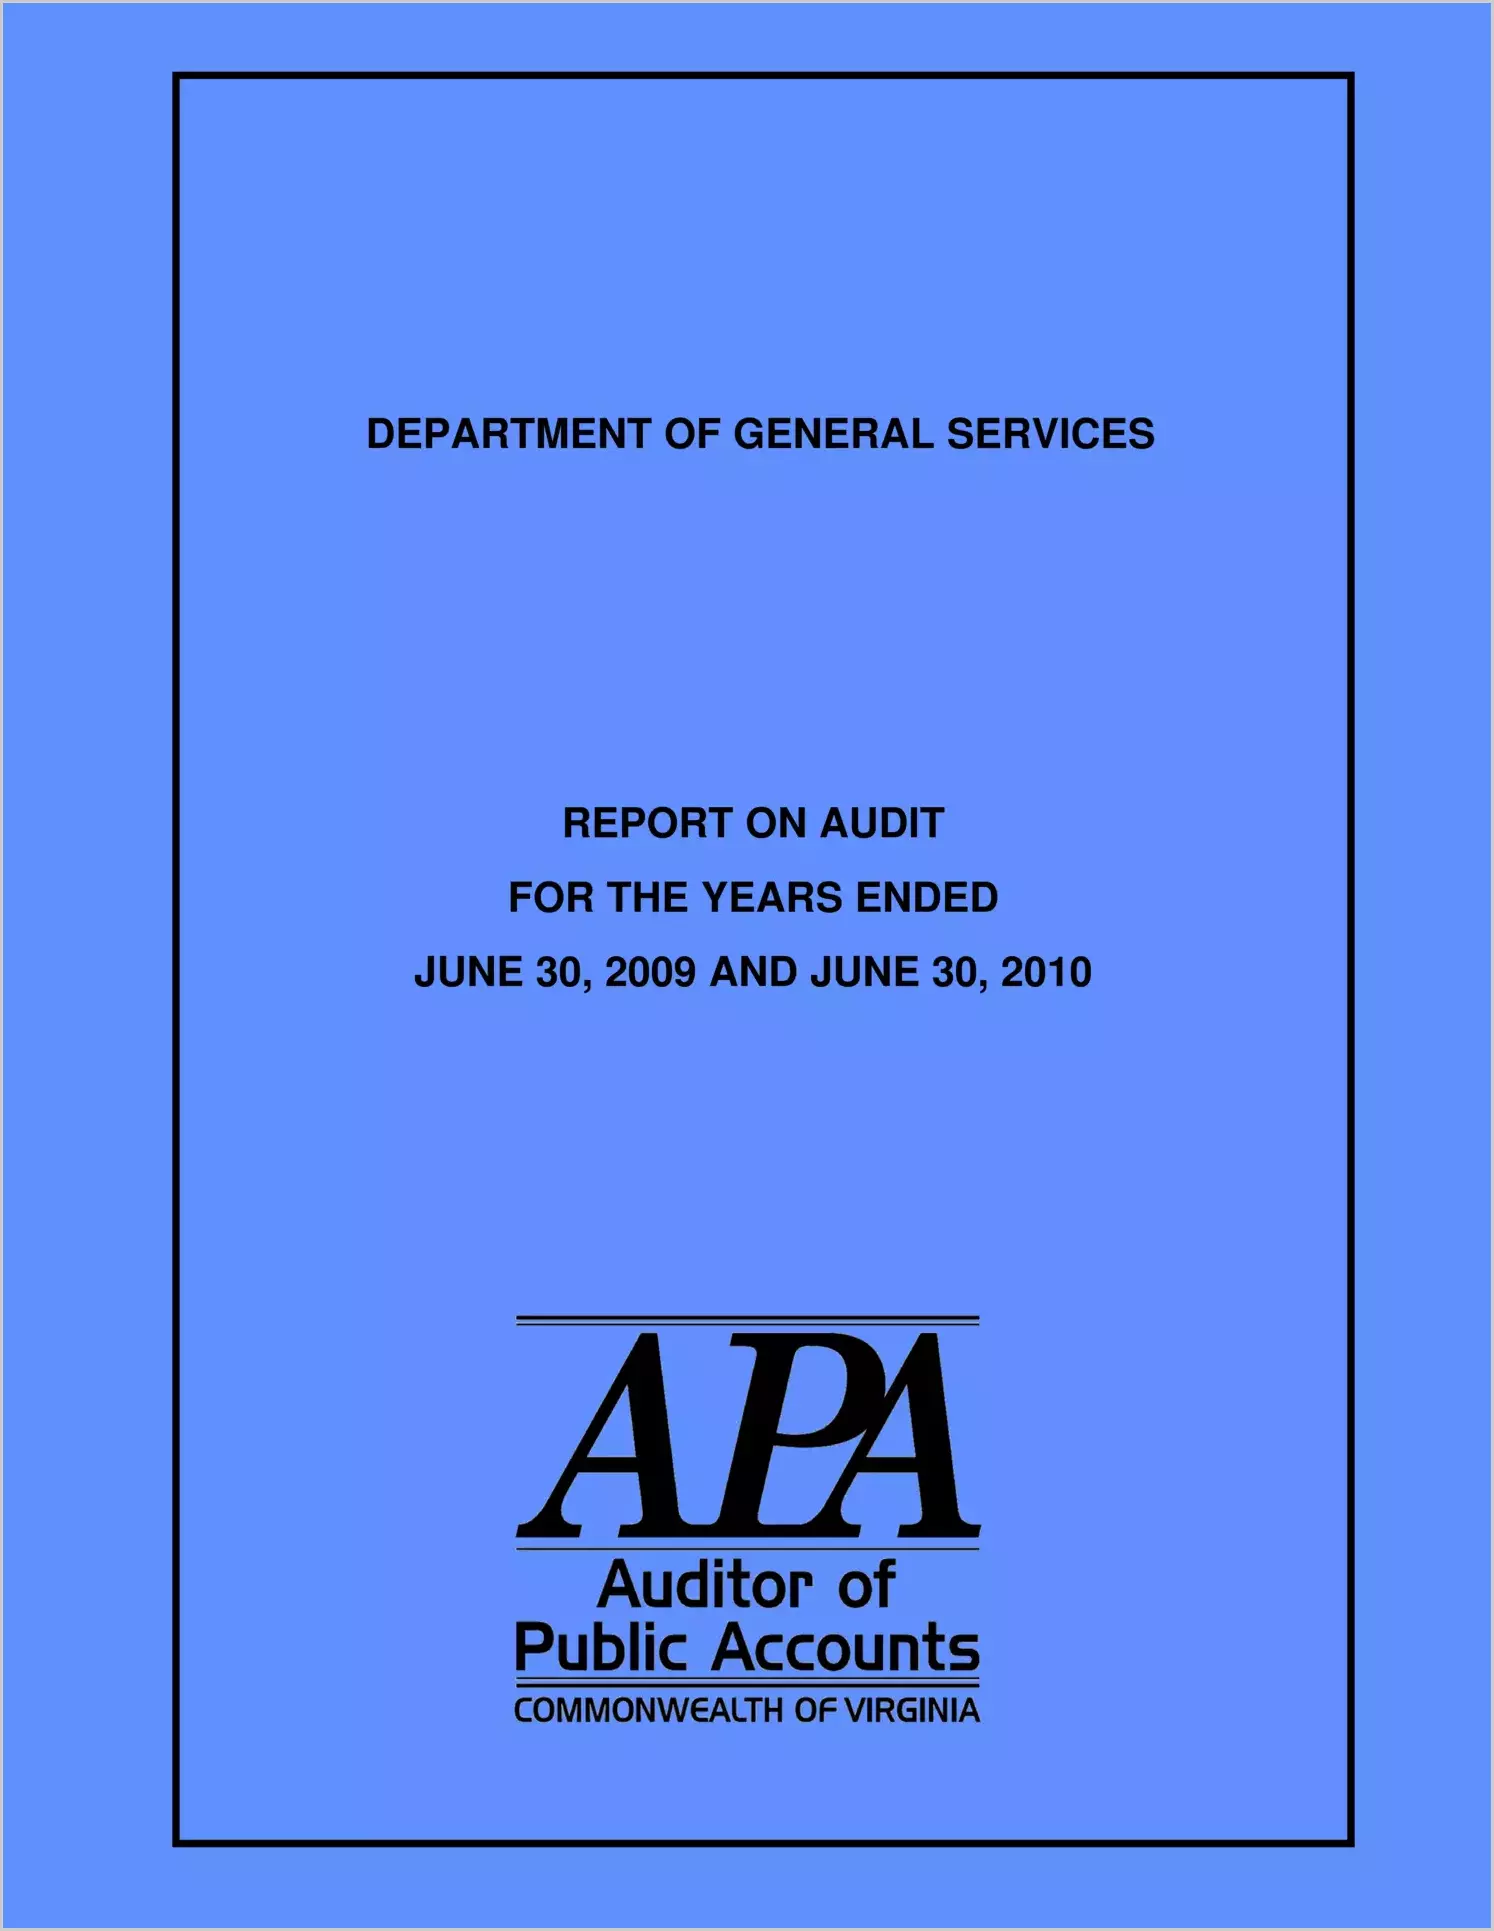 Department of General Services for the fiscal years ended June 30, 2009 and June 30, 2010